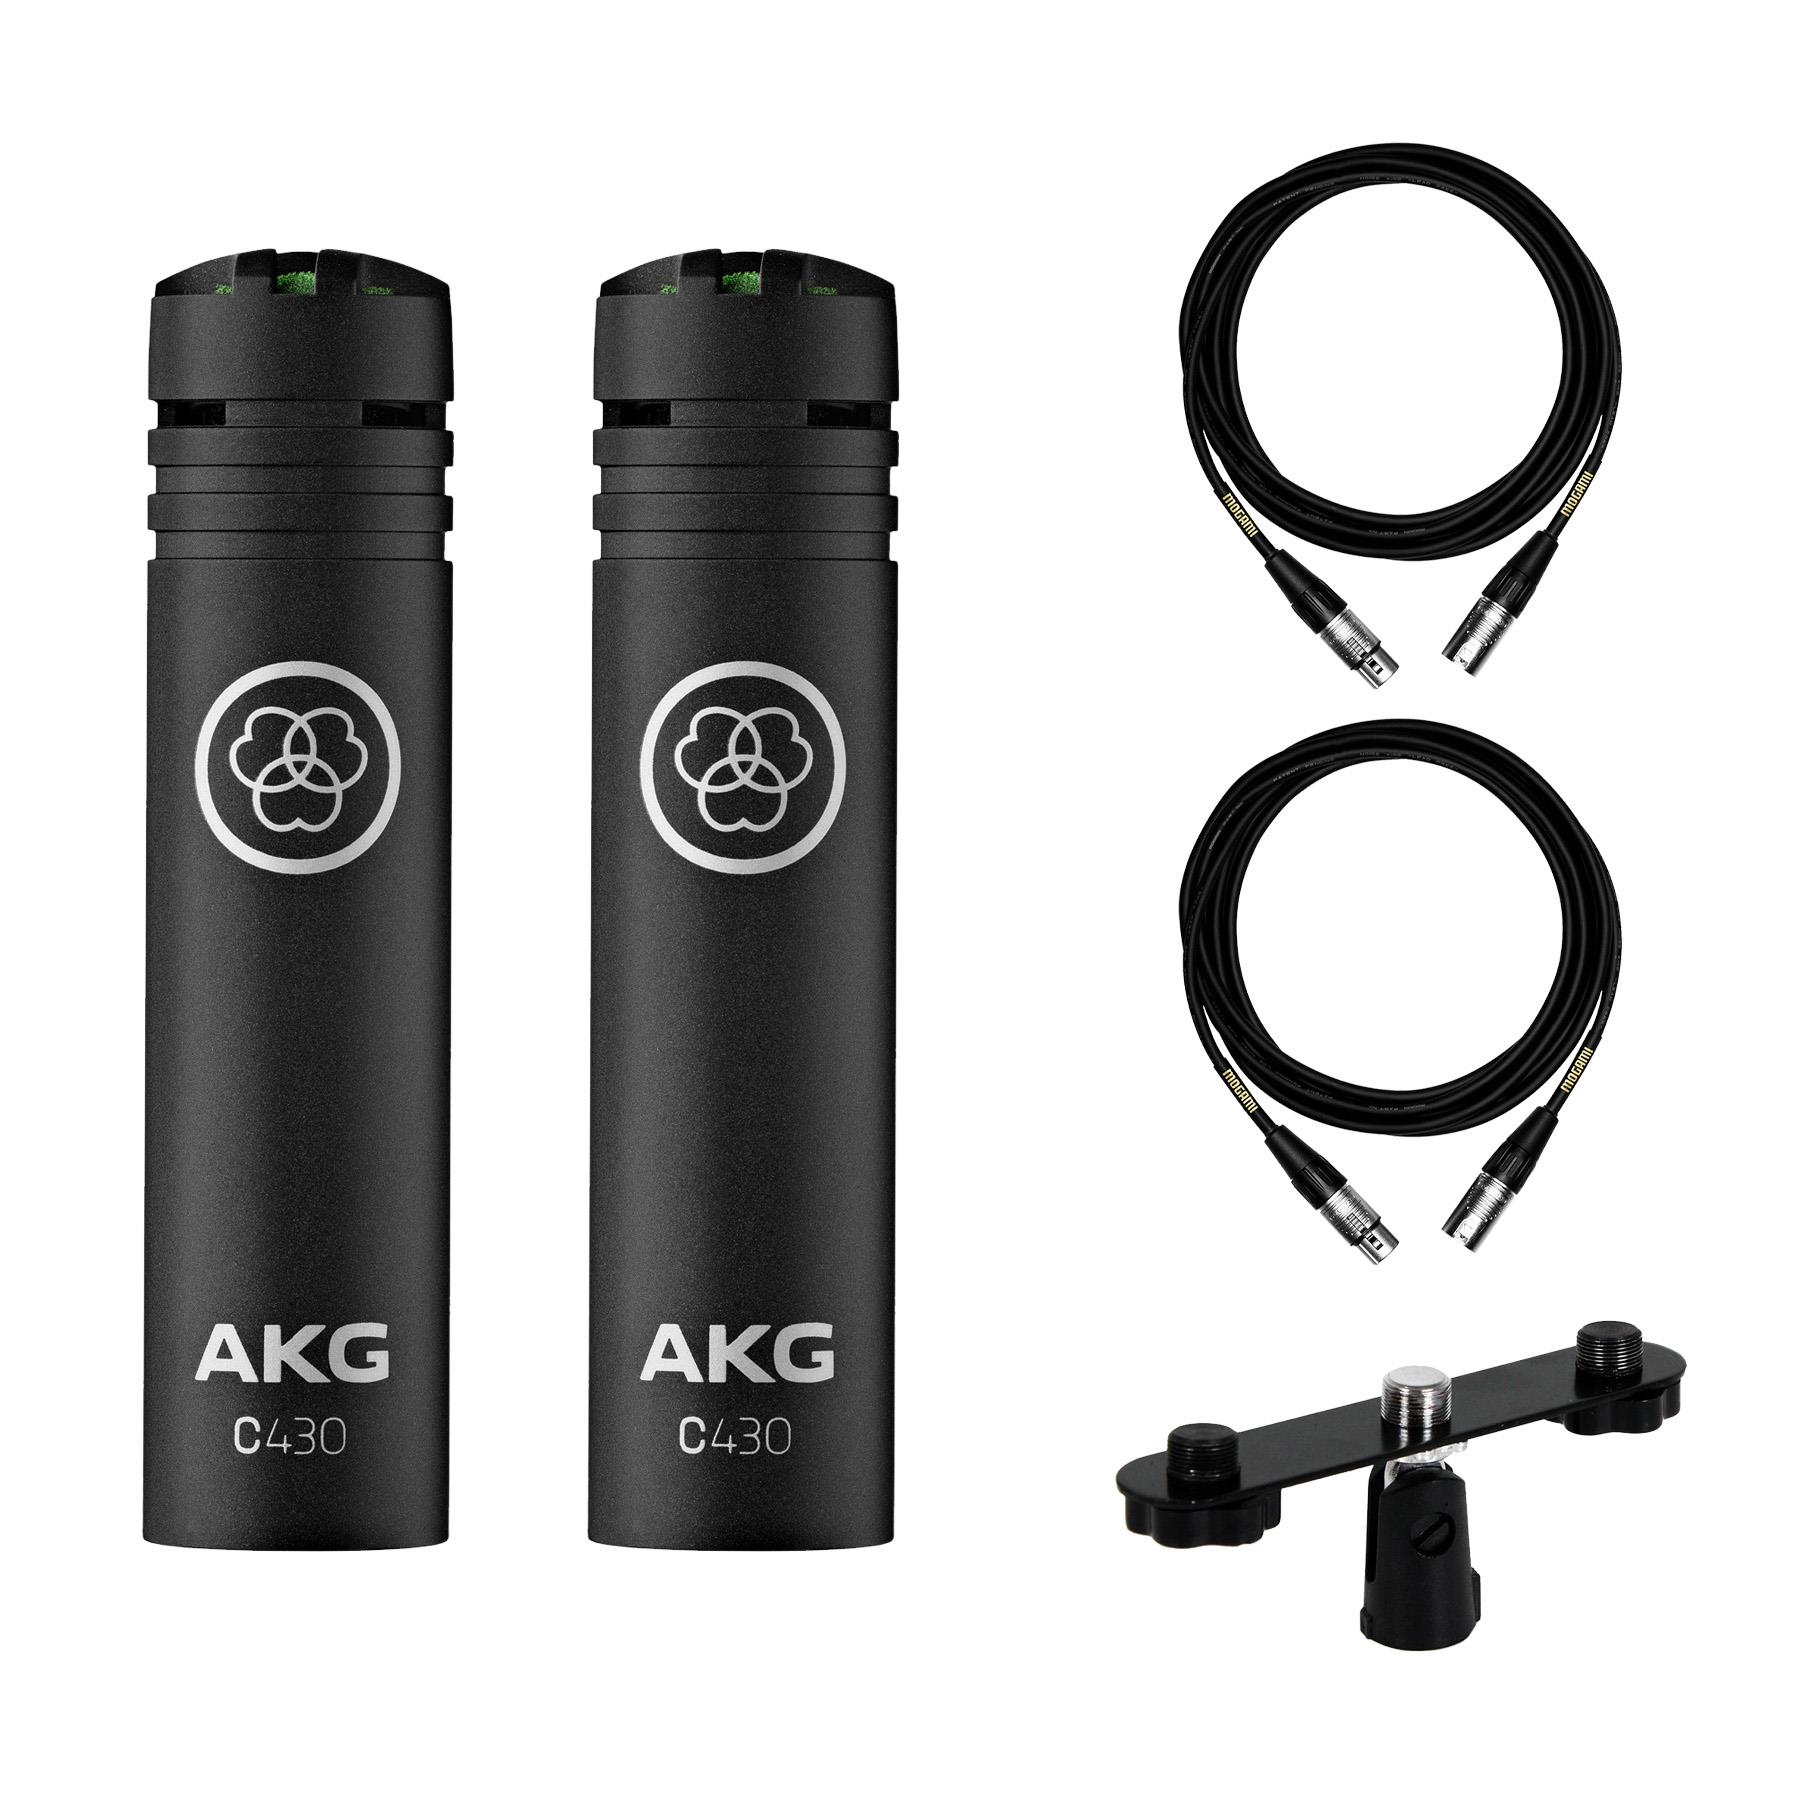 AKG C430 Microphone Stereo Pair Bundle with Mogami XLR Cables & Stereo Bar - image 1 of 5